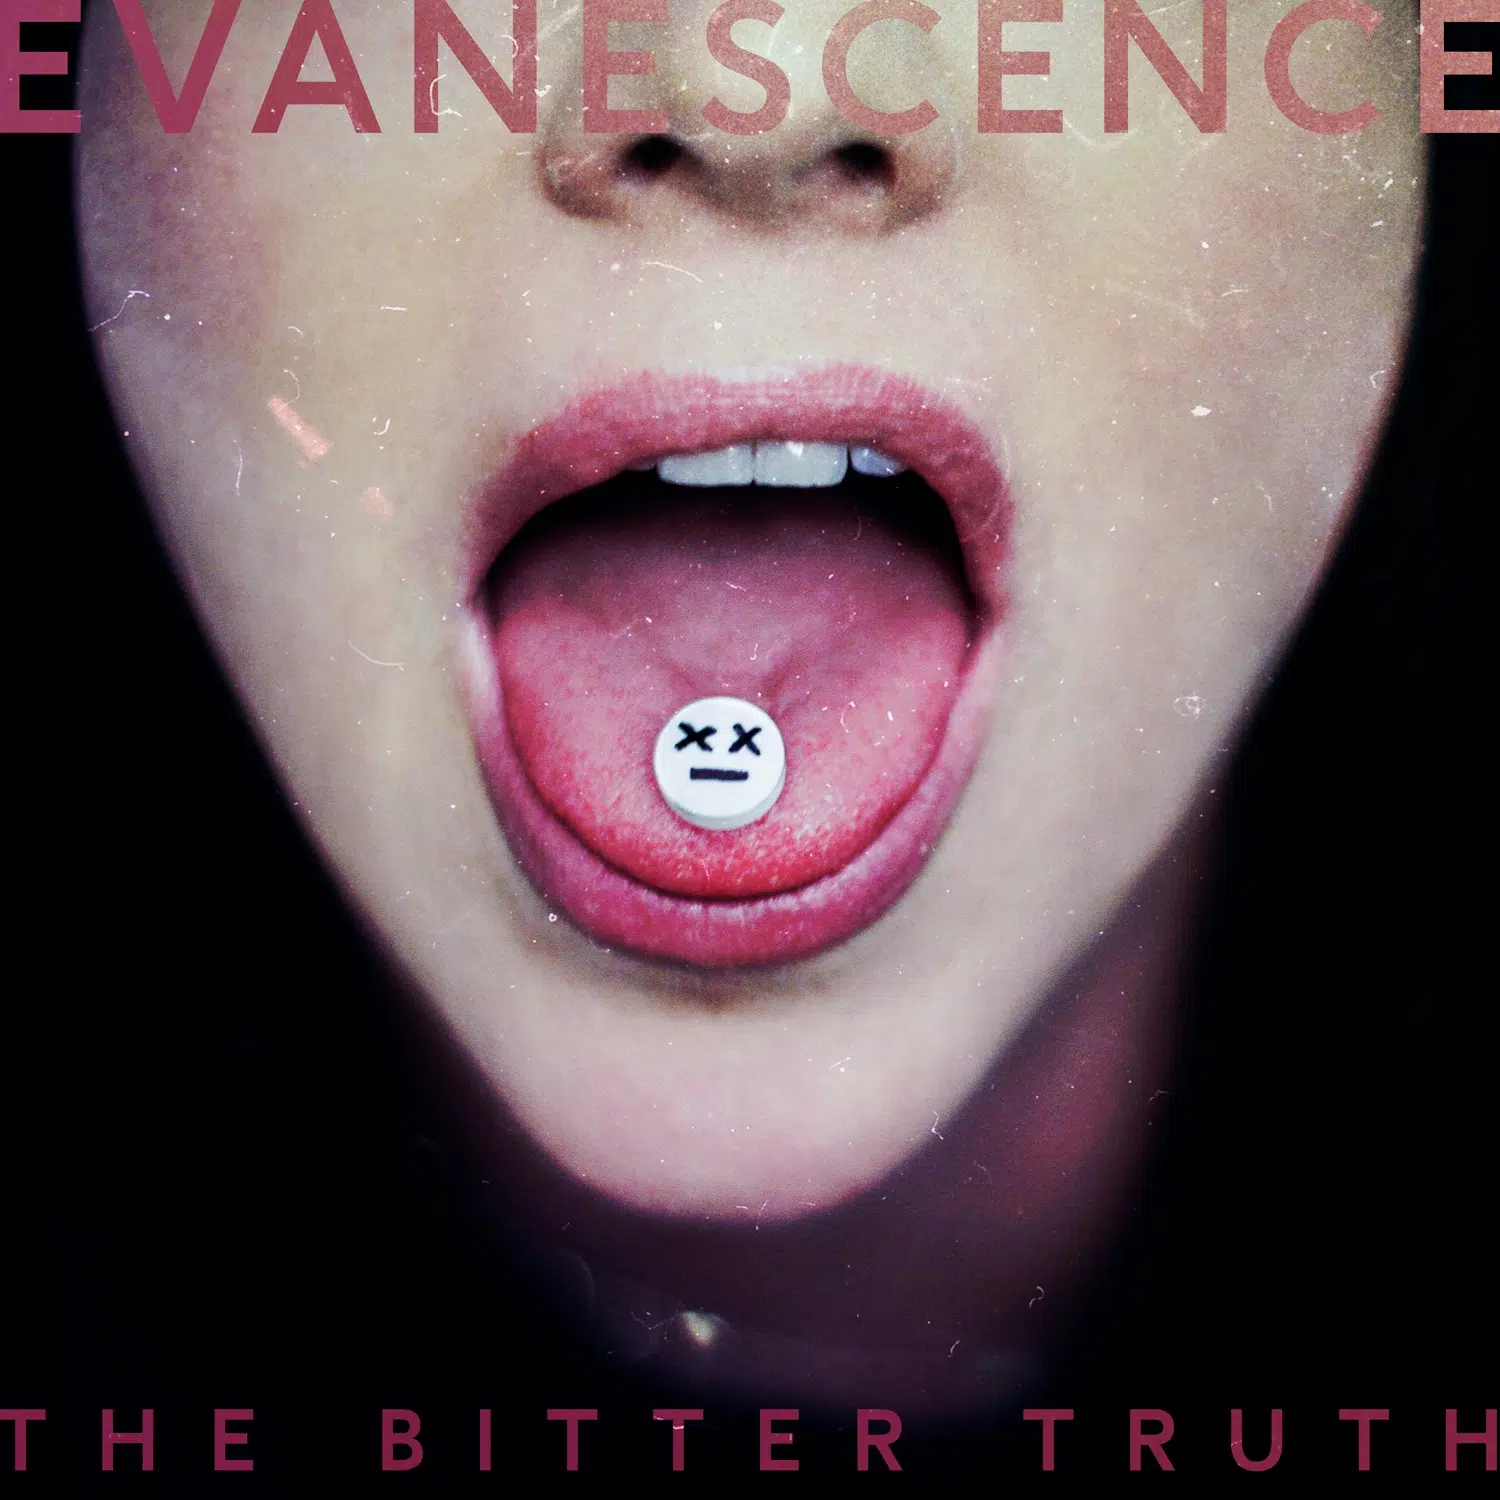 Evanescence want to tell you THE BITTER TRUTH